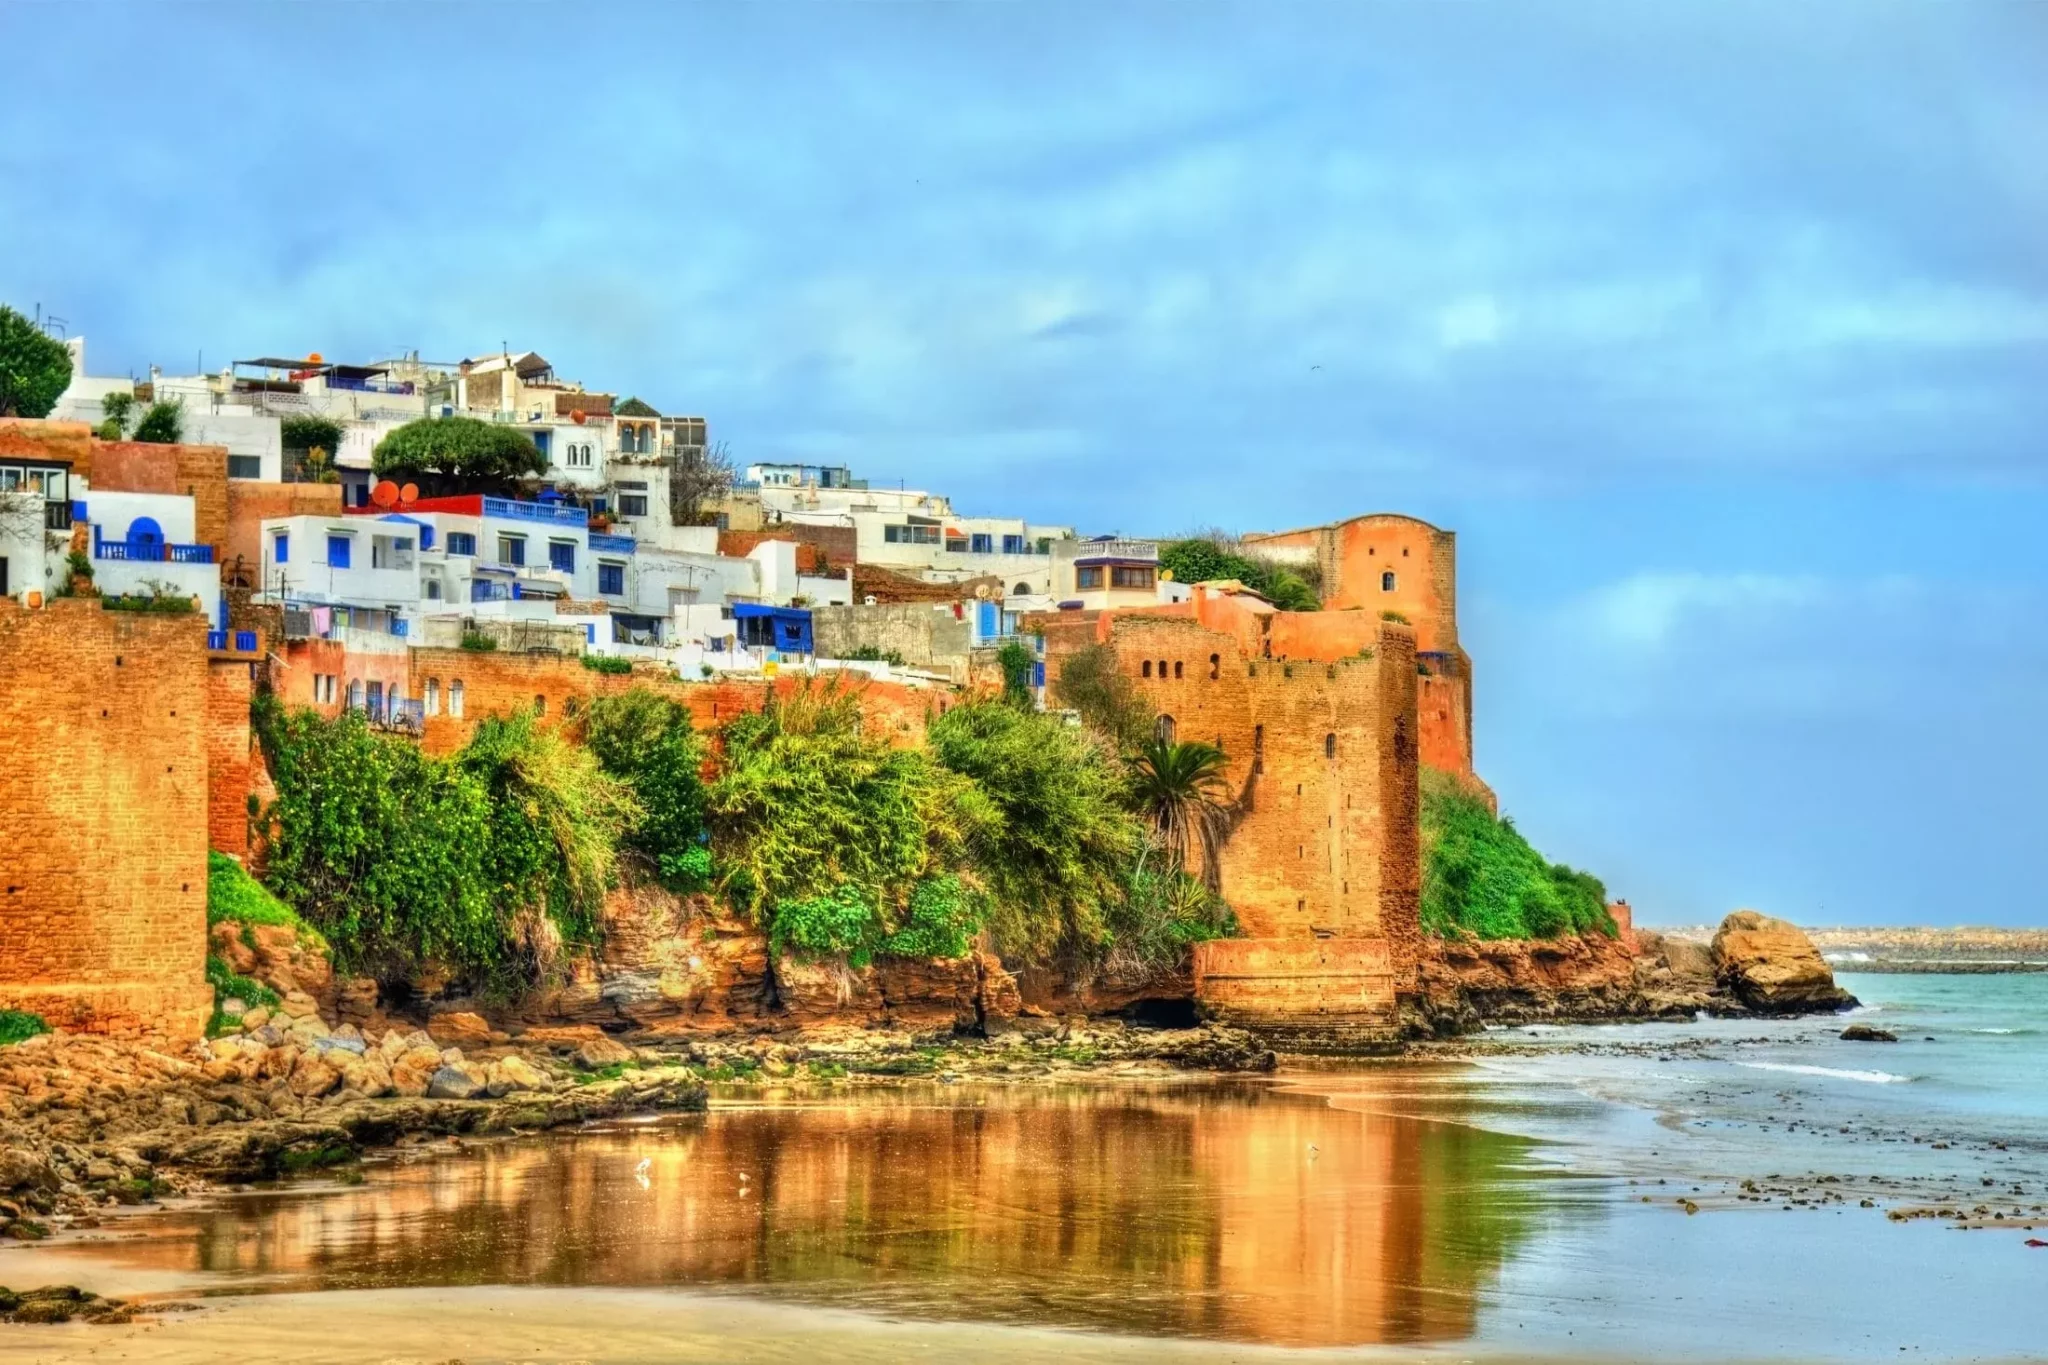 Ancient fortress Kasbah of the Udayas in Morocco